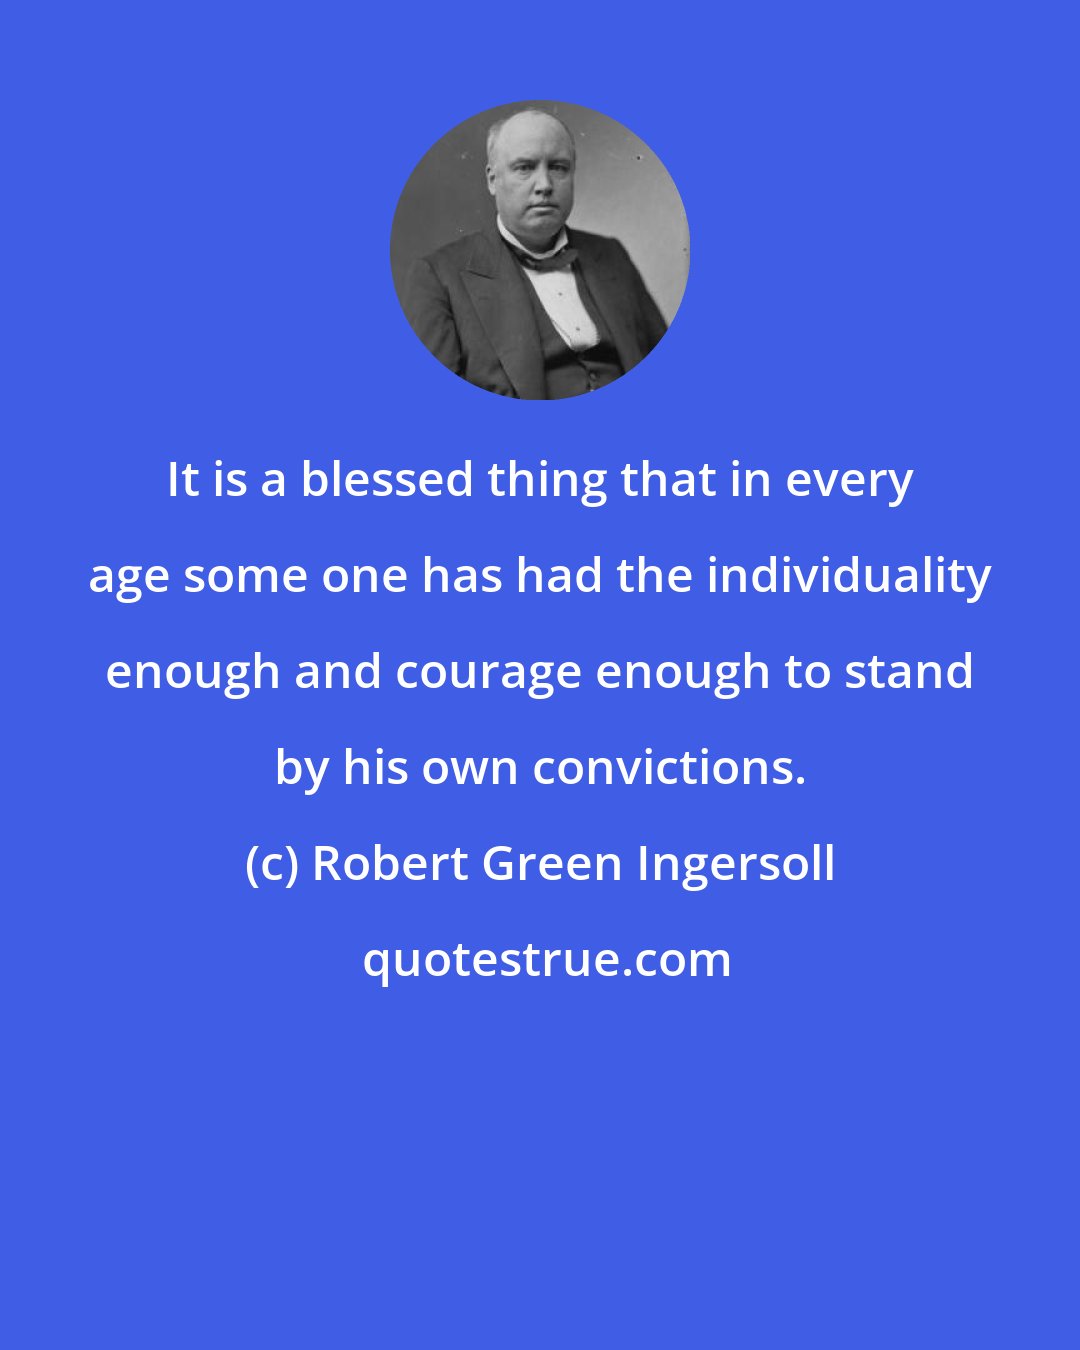 Robert Green Ingersoll: It is a blessed thing that in every age some one has had the individuality enough and courage enough to stand by his own convictions.